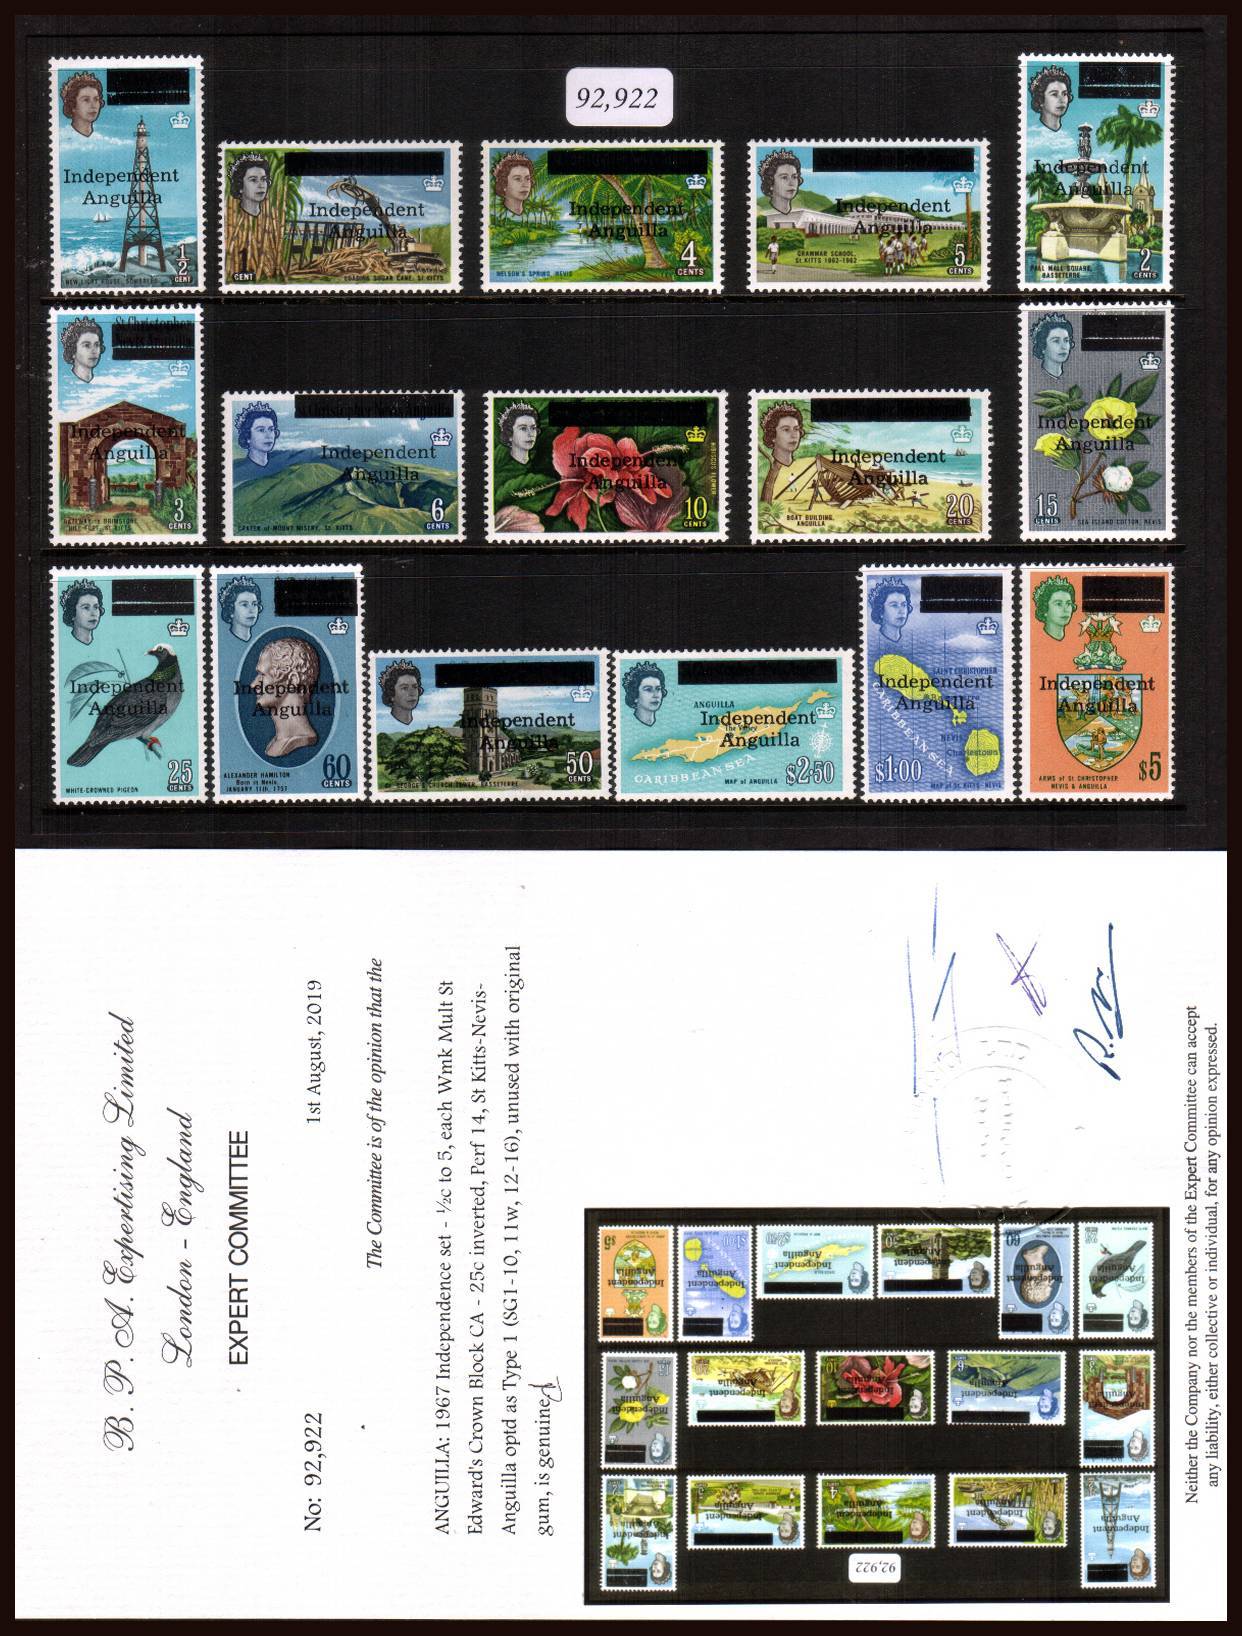 The Rarest set of QEII British Commonwealth Philately!<br/>
Unmounted mint set with a BPA certificate (2019) stating GENUINE! Complete sets in the world unmounted, maybe 40? Terms are available. SG Cat �,000 
<b><p style=